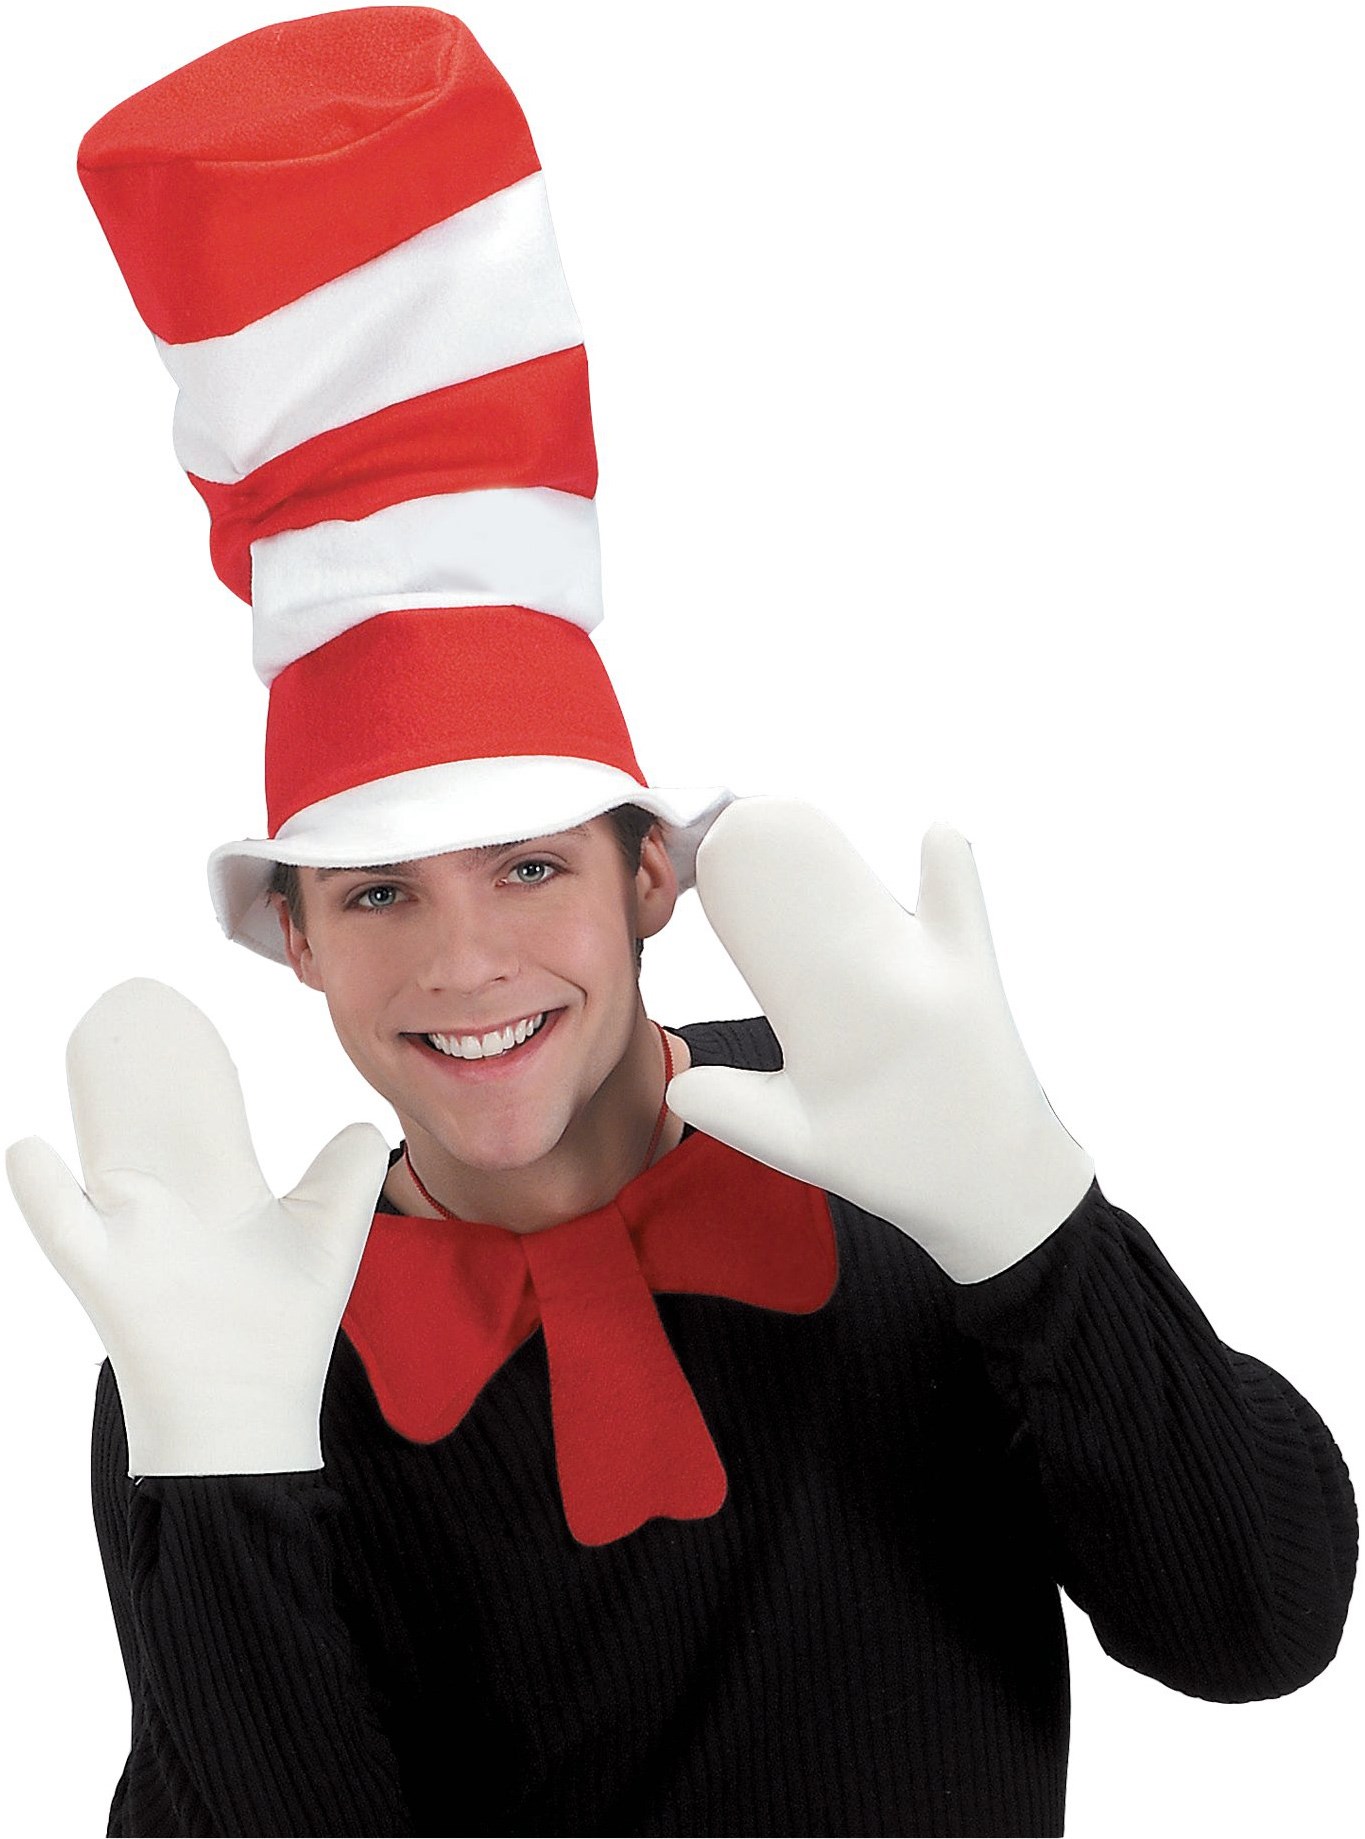 Dr. Seuss The Cat in the Hat Movie - The Cat in the Hat Mitts Adult